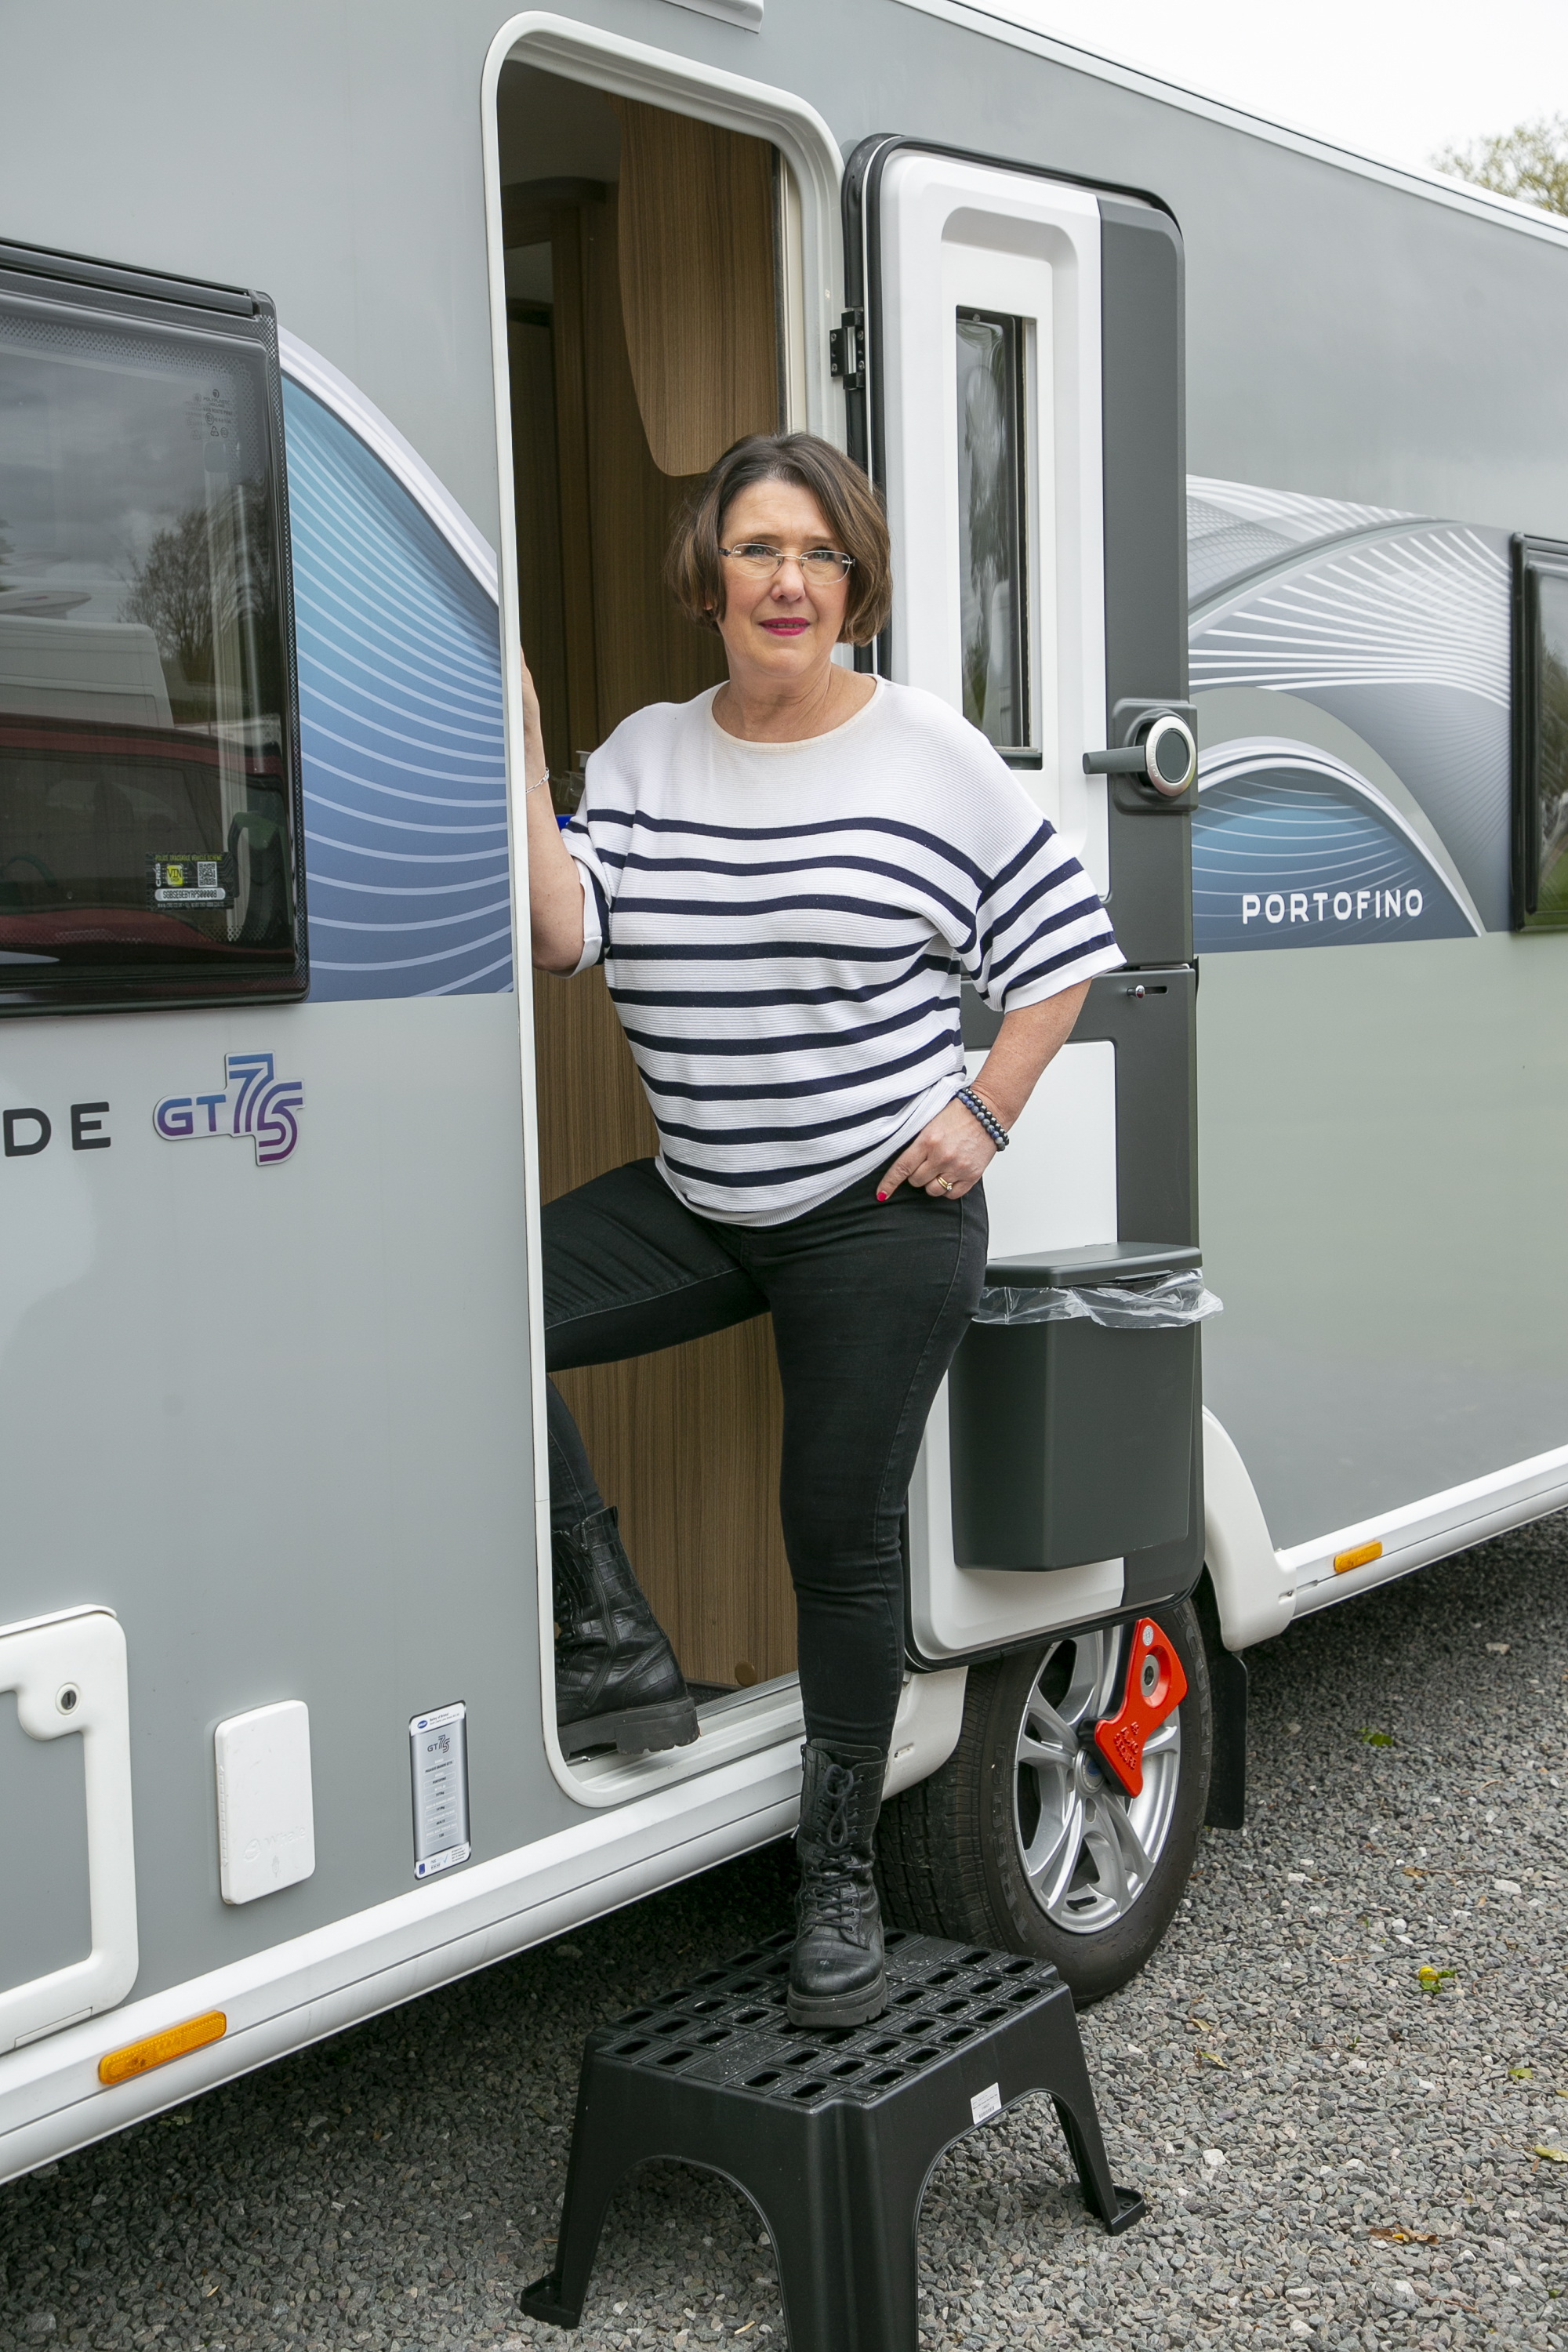 The Sun's Head Of Travel, Lisa Minot is a lifelong fan of caravan holidays - here she shares her tips for cooking for families in the typically tiny kitchens